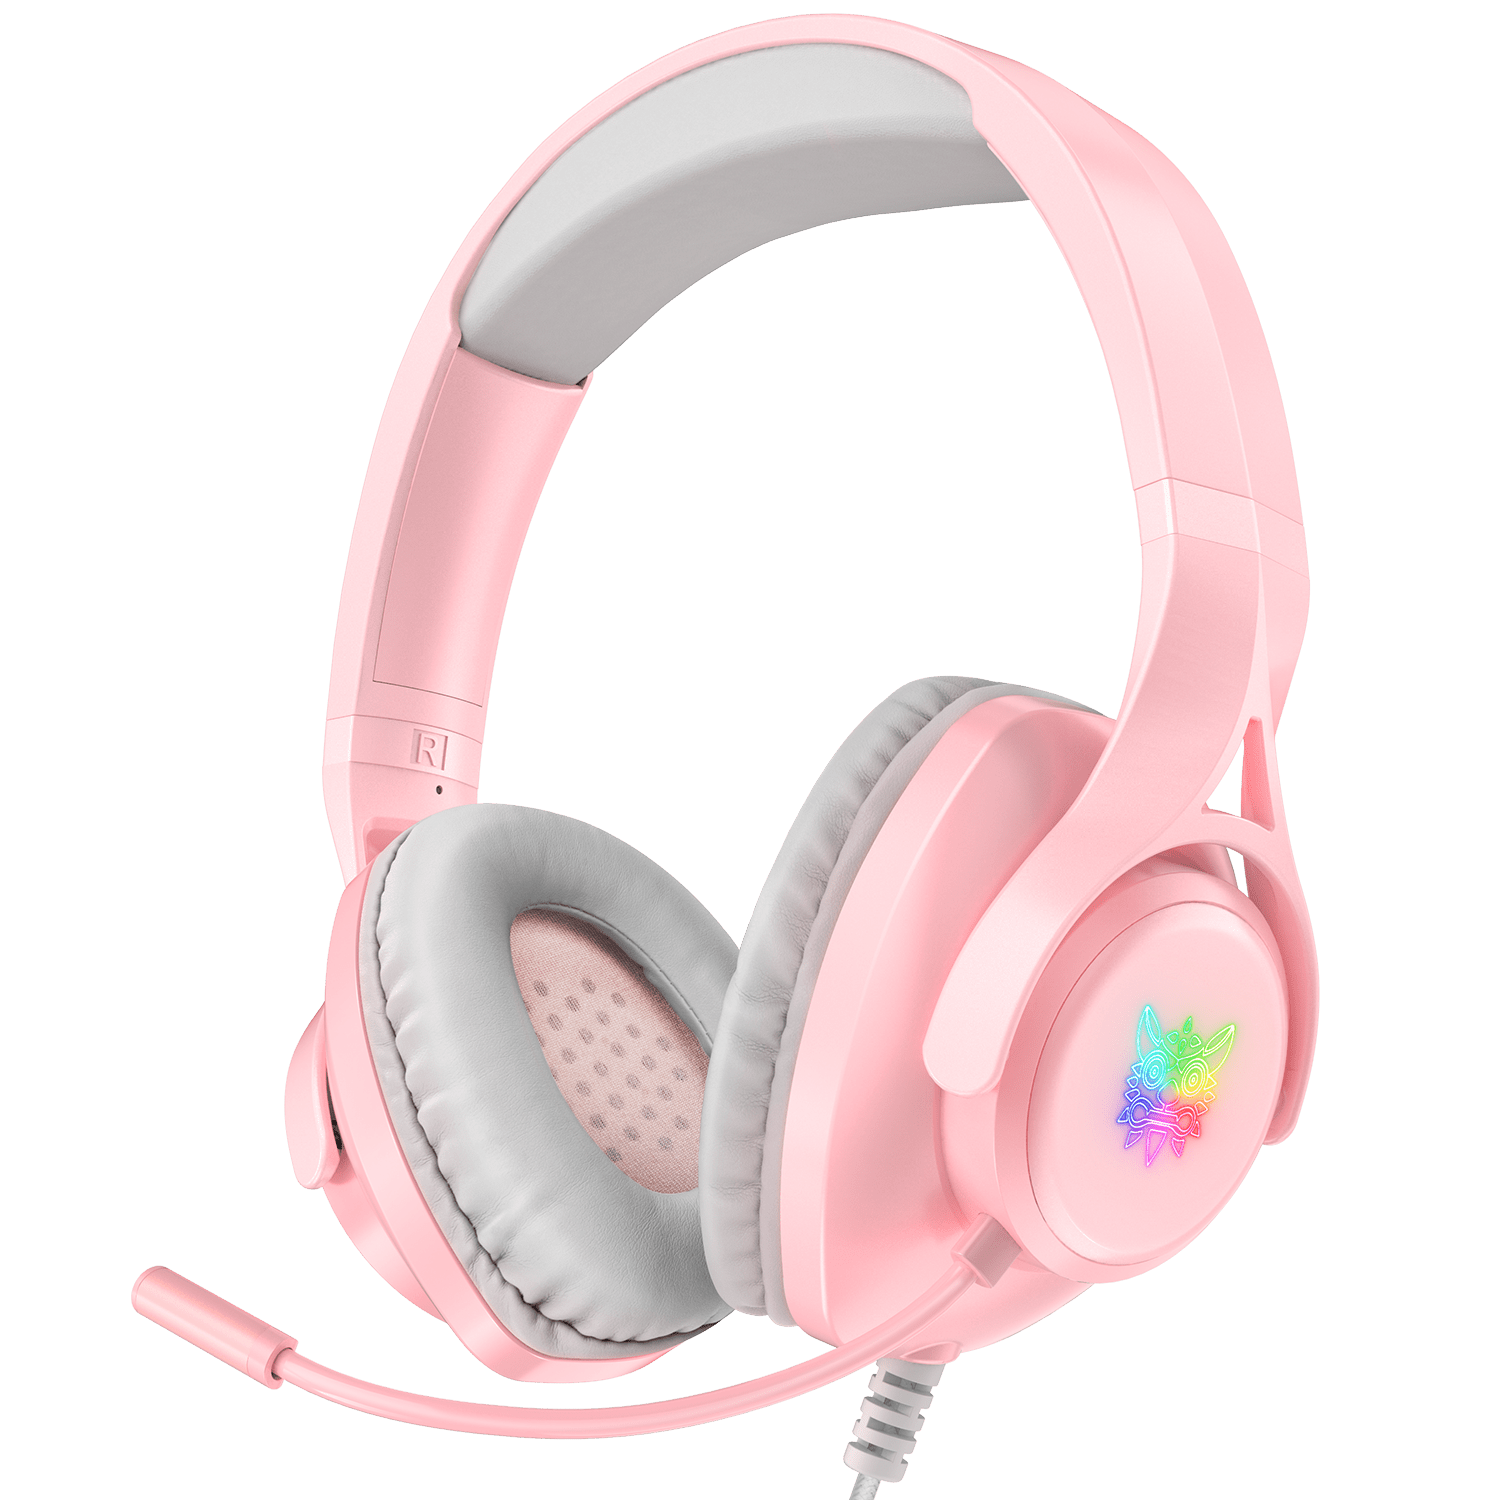 ONIKUMA-X16-Wired-Gaming-Headset-RGB-Over-ear-Headphone-Surround-Sound-Stereo-Headsets-with-Noise-Cancelling-Mic-for-PC-PS4-Xbox_2048x2048